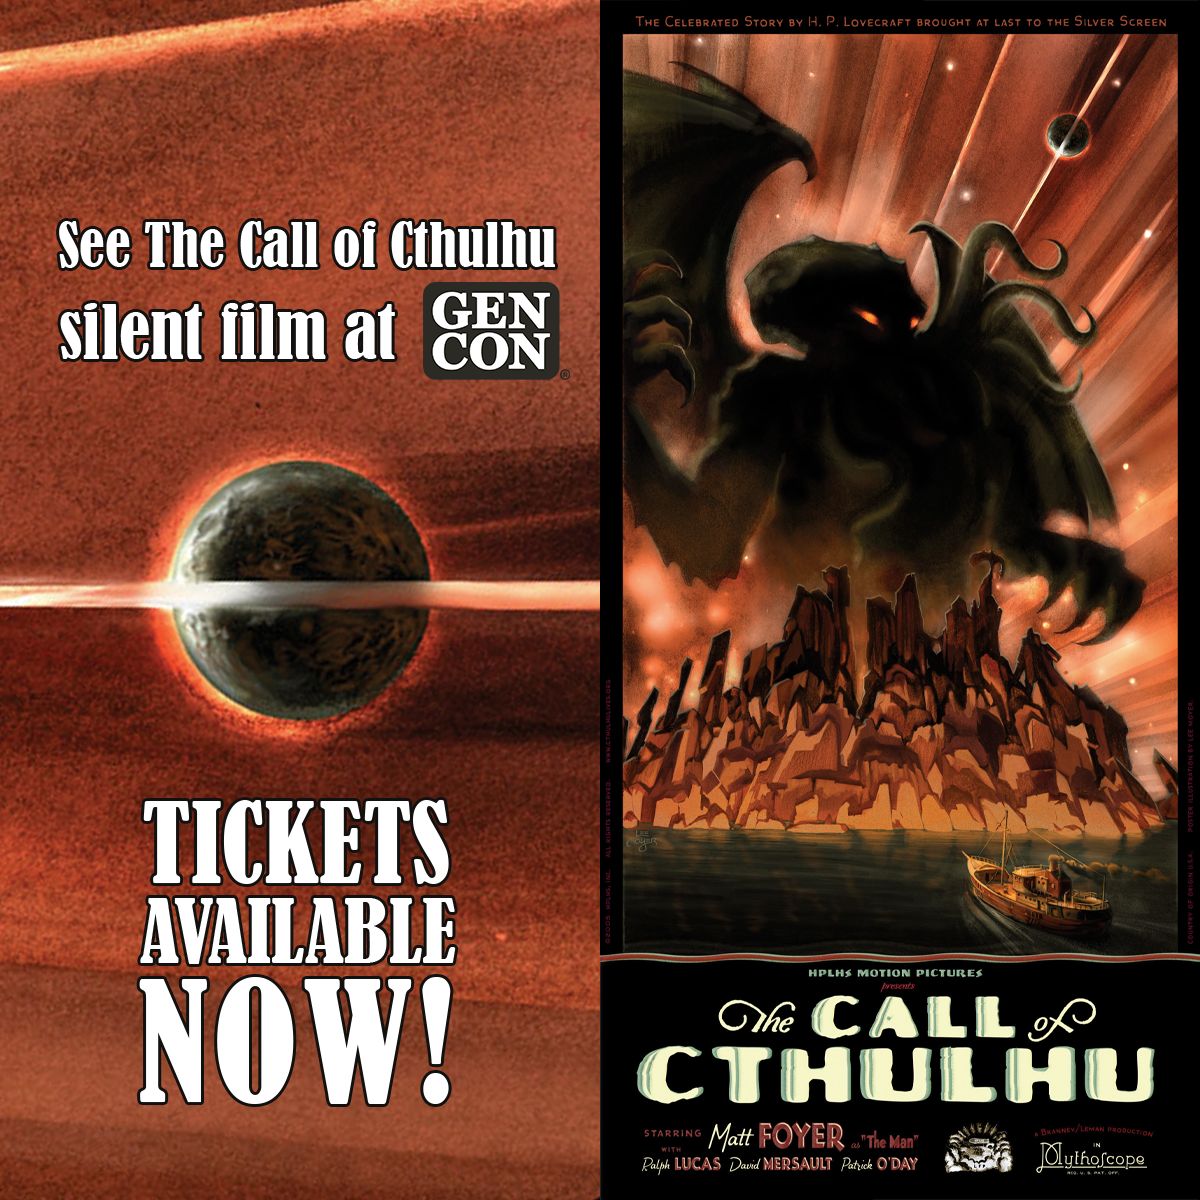 HPLHS's The Call of Cthulhu movie at Gen Con